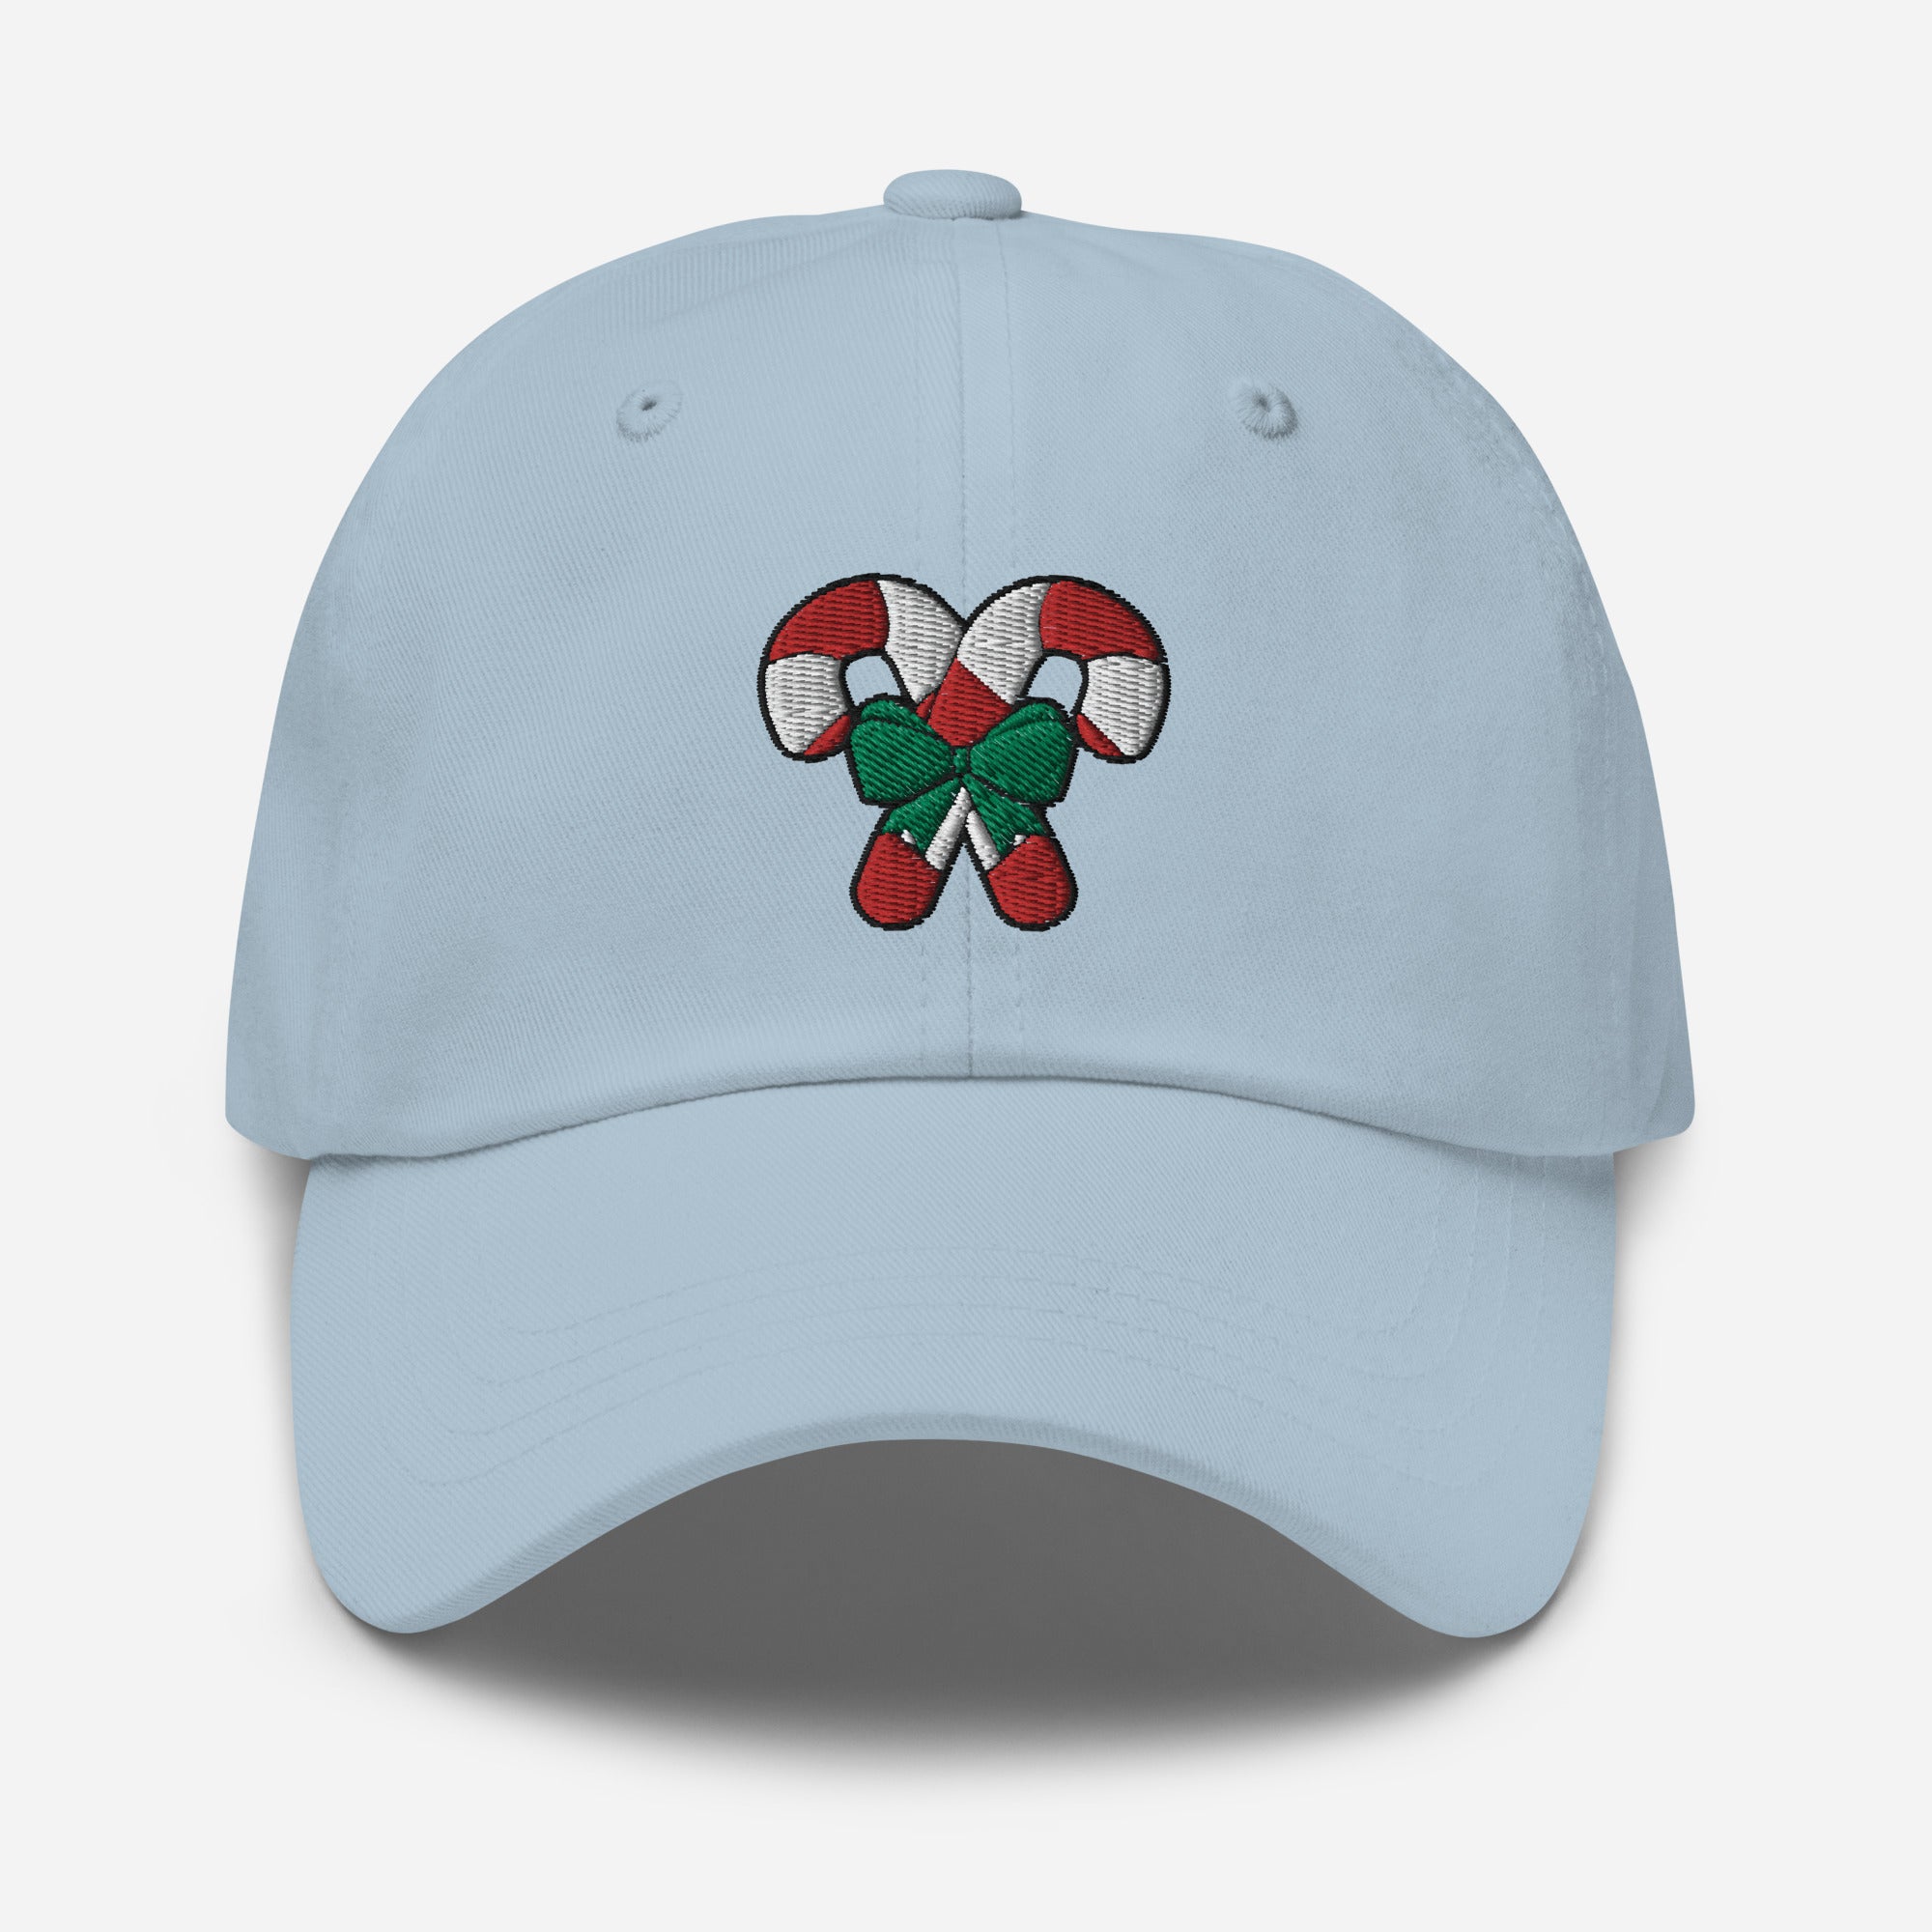 Candy Cane Dad Hat, Embroidered Christmas Unisex Hat, Handmade Dad Cap, Xmas Festive Adjustable Baseball Gift Cap